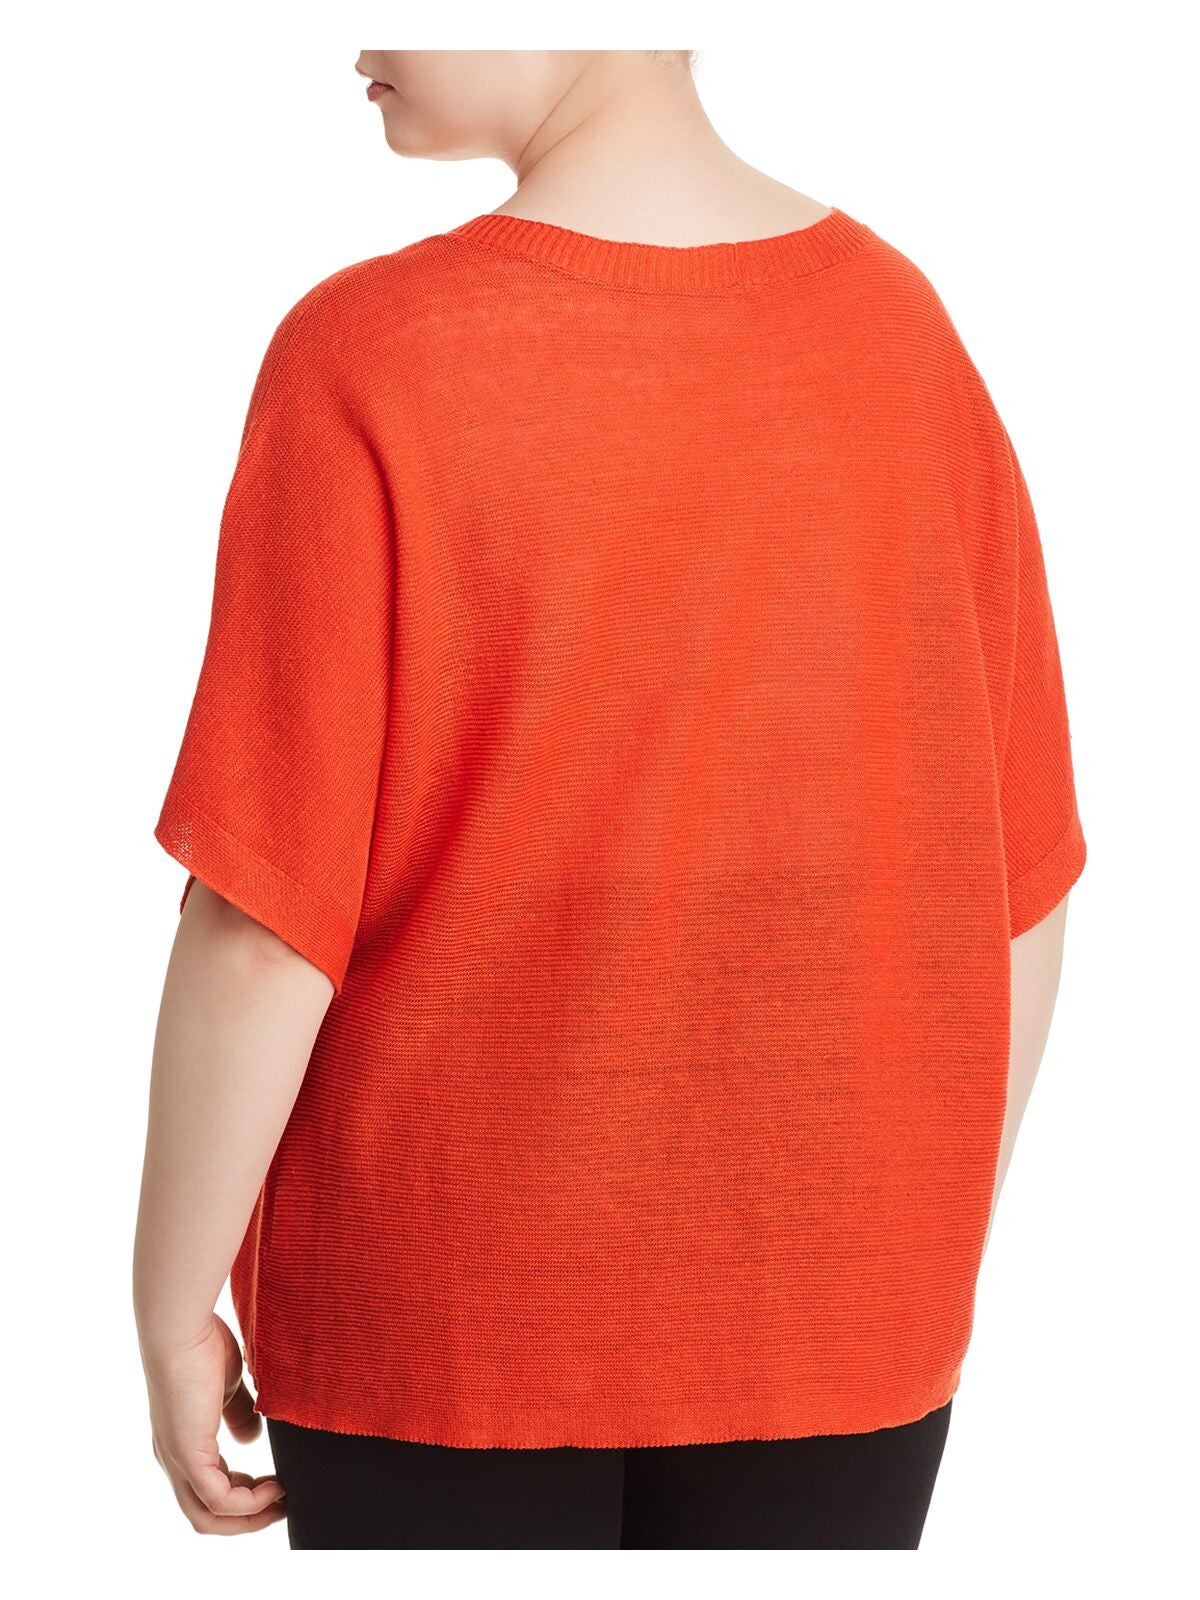 EILEEN FISHER Womens Orange Ribbed Low Cut Short Sleeve V Neck Sweater Plus 2X